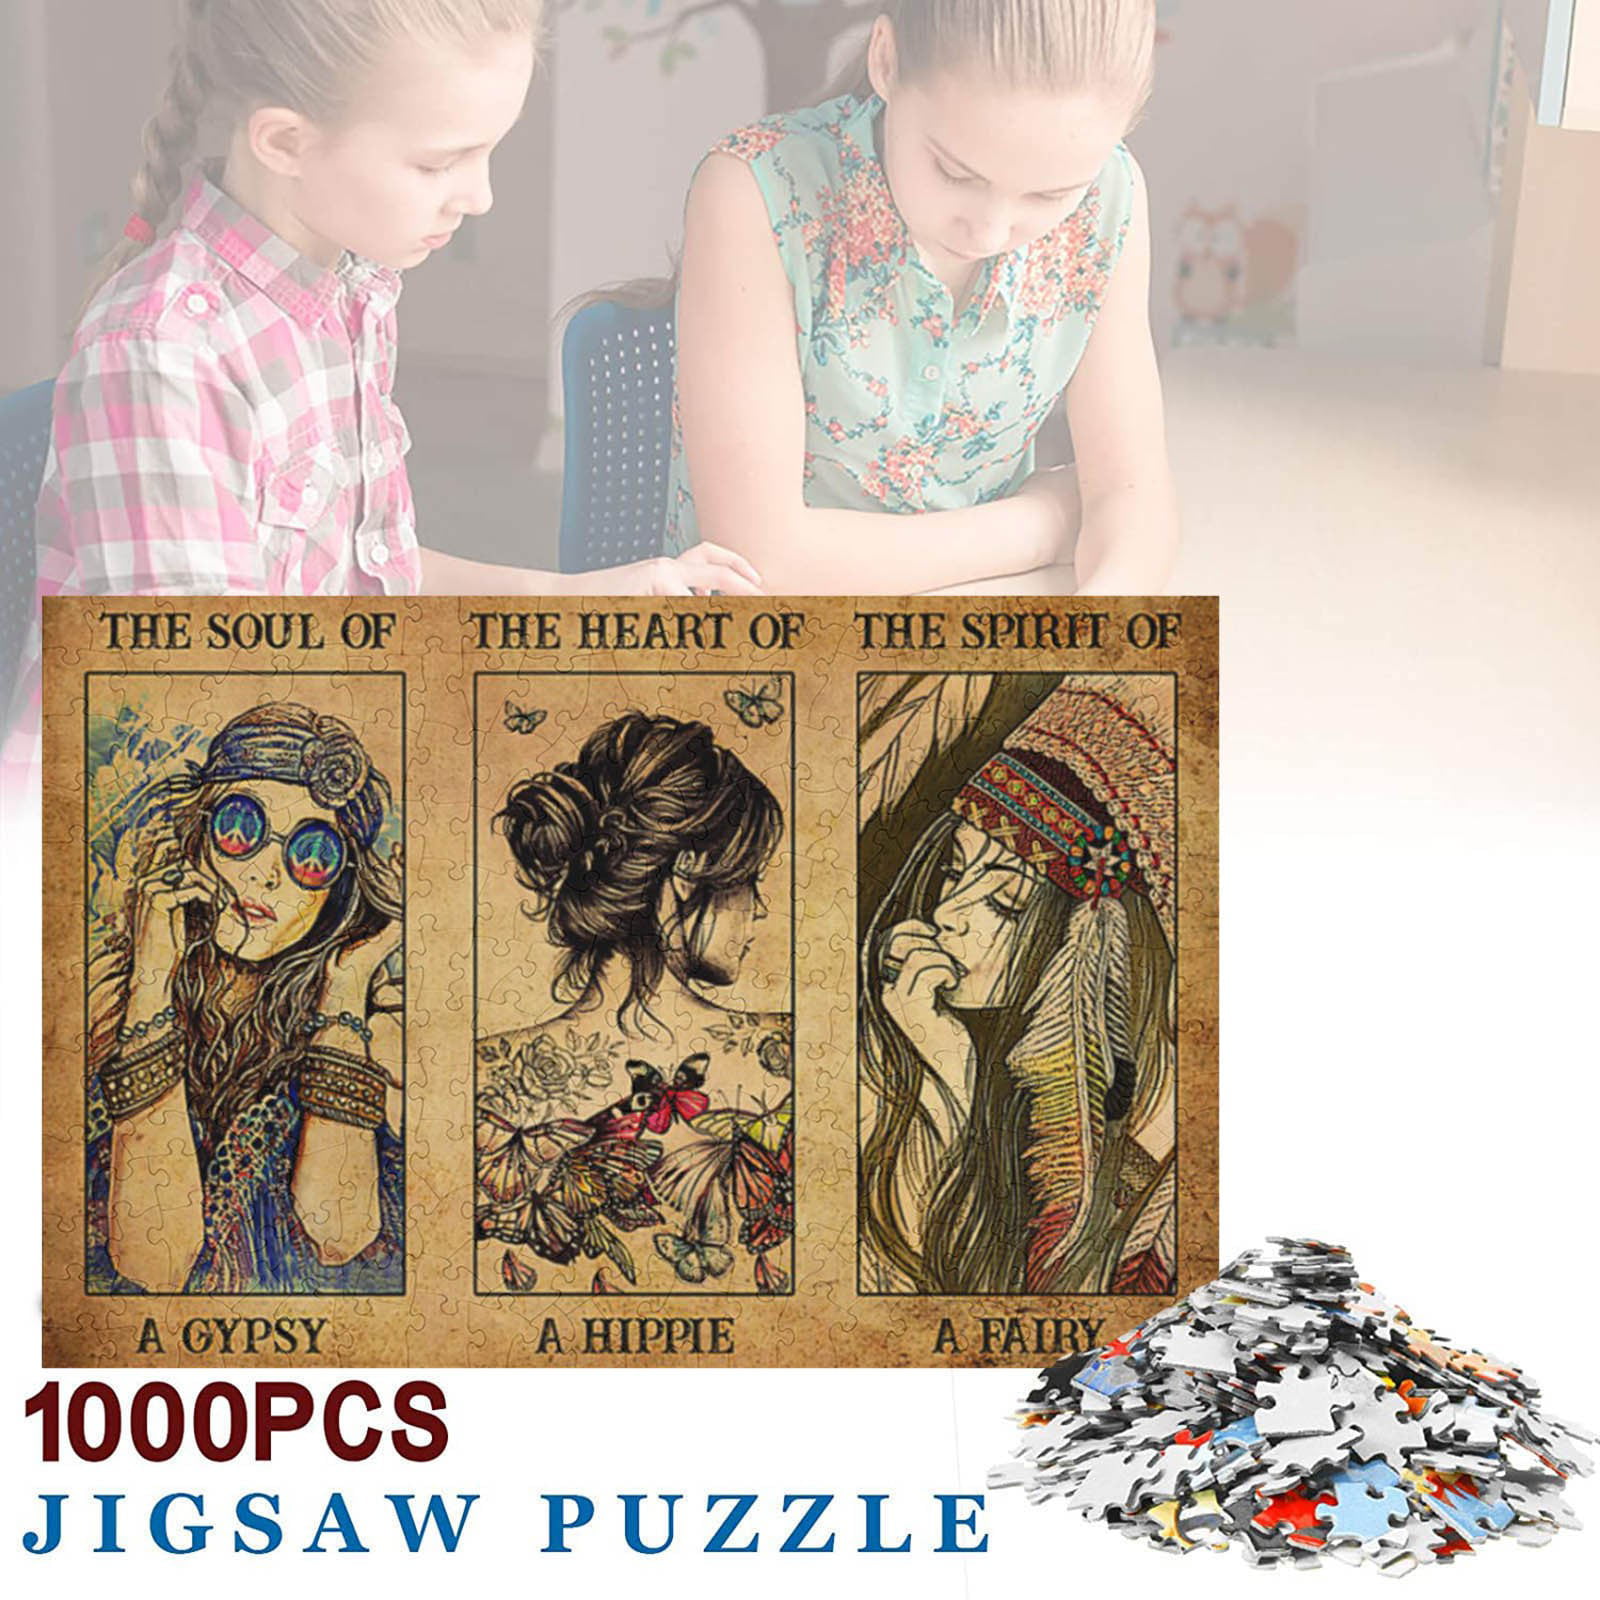 1000 Pieces Jigsaw Puzzles Adult Growups Kids Puzzles Educational DIY Gifts Toys 